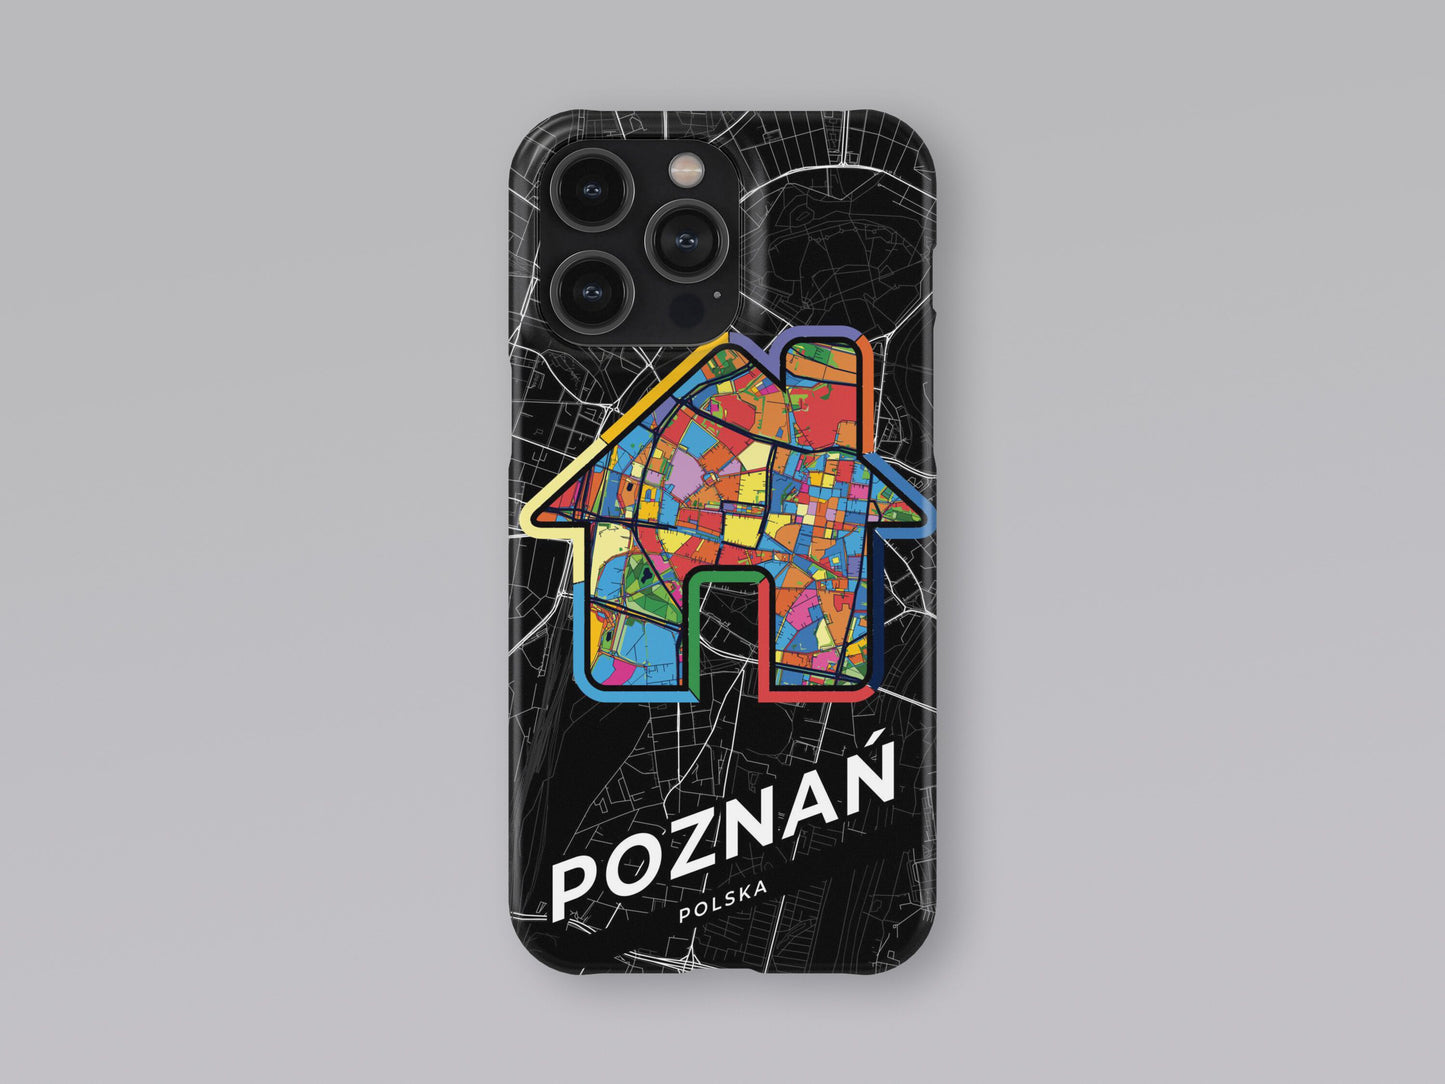 Poznań Poland slim phone case with colorful icon. Birthday, wedding or housewarming gift. Couple match cases. 3